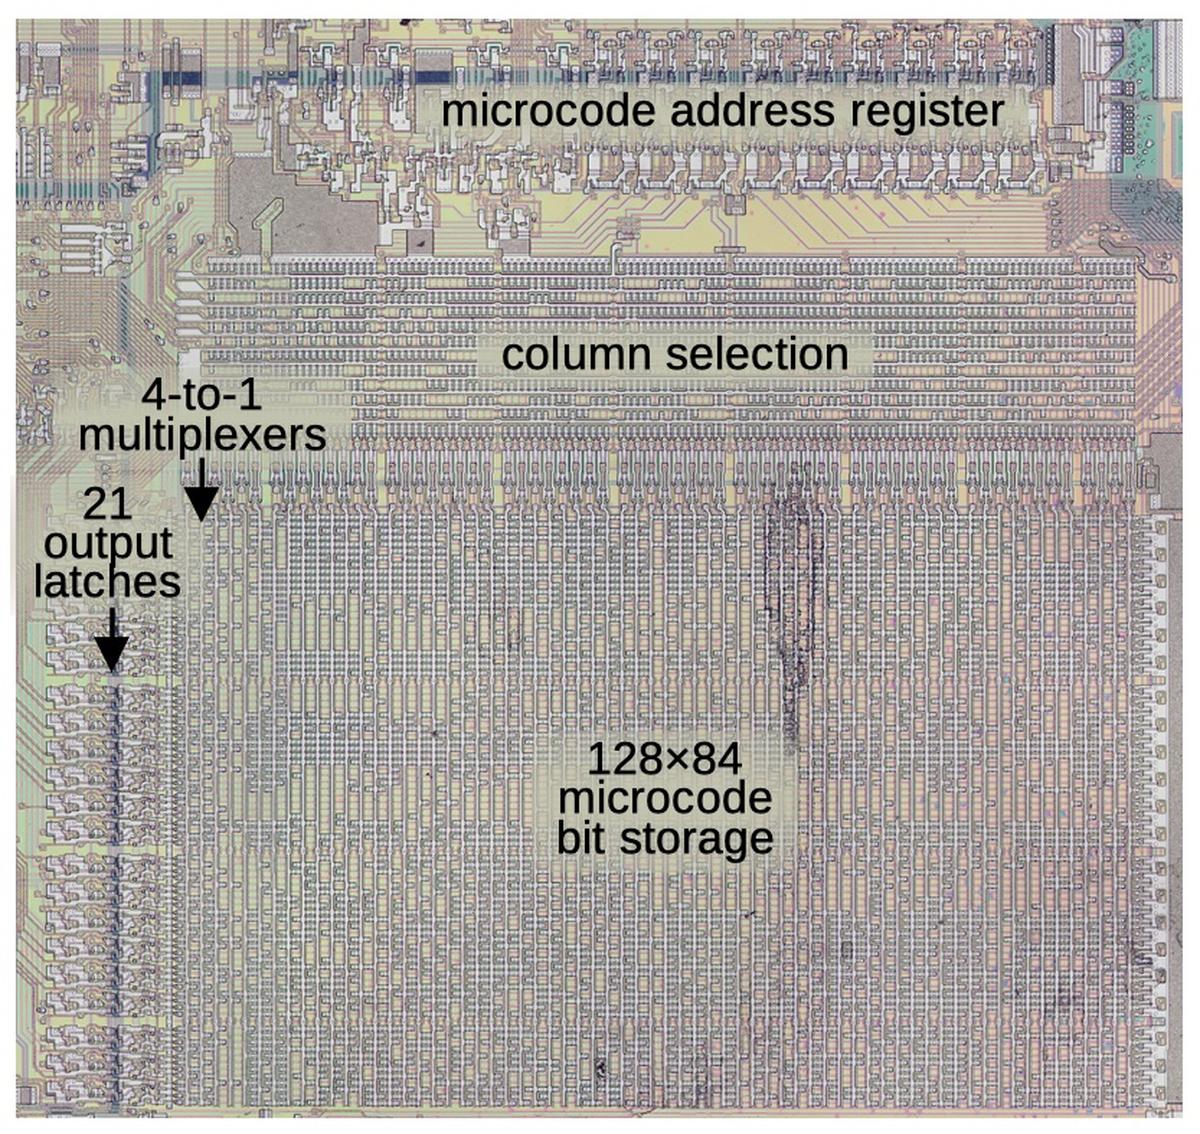 The main components of the microcode engine. The metal layer has been removed to show the silicon and polysilicon underneath. If you zoom in, the bit pattern is visible in the silicon doping pattern.